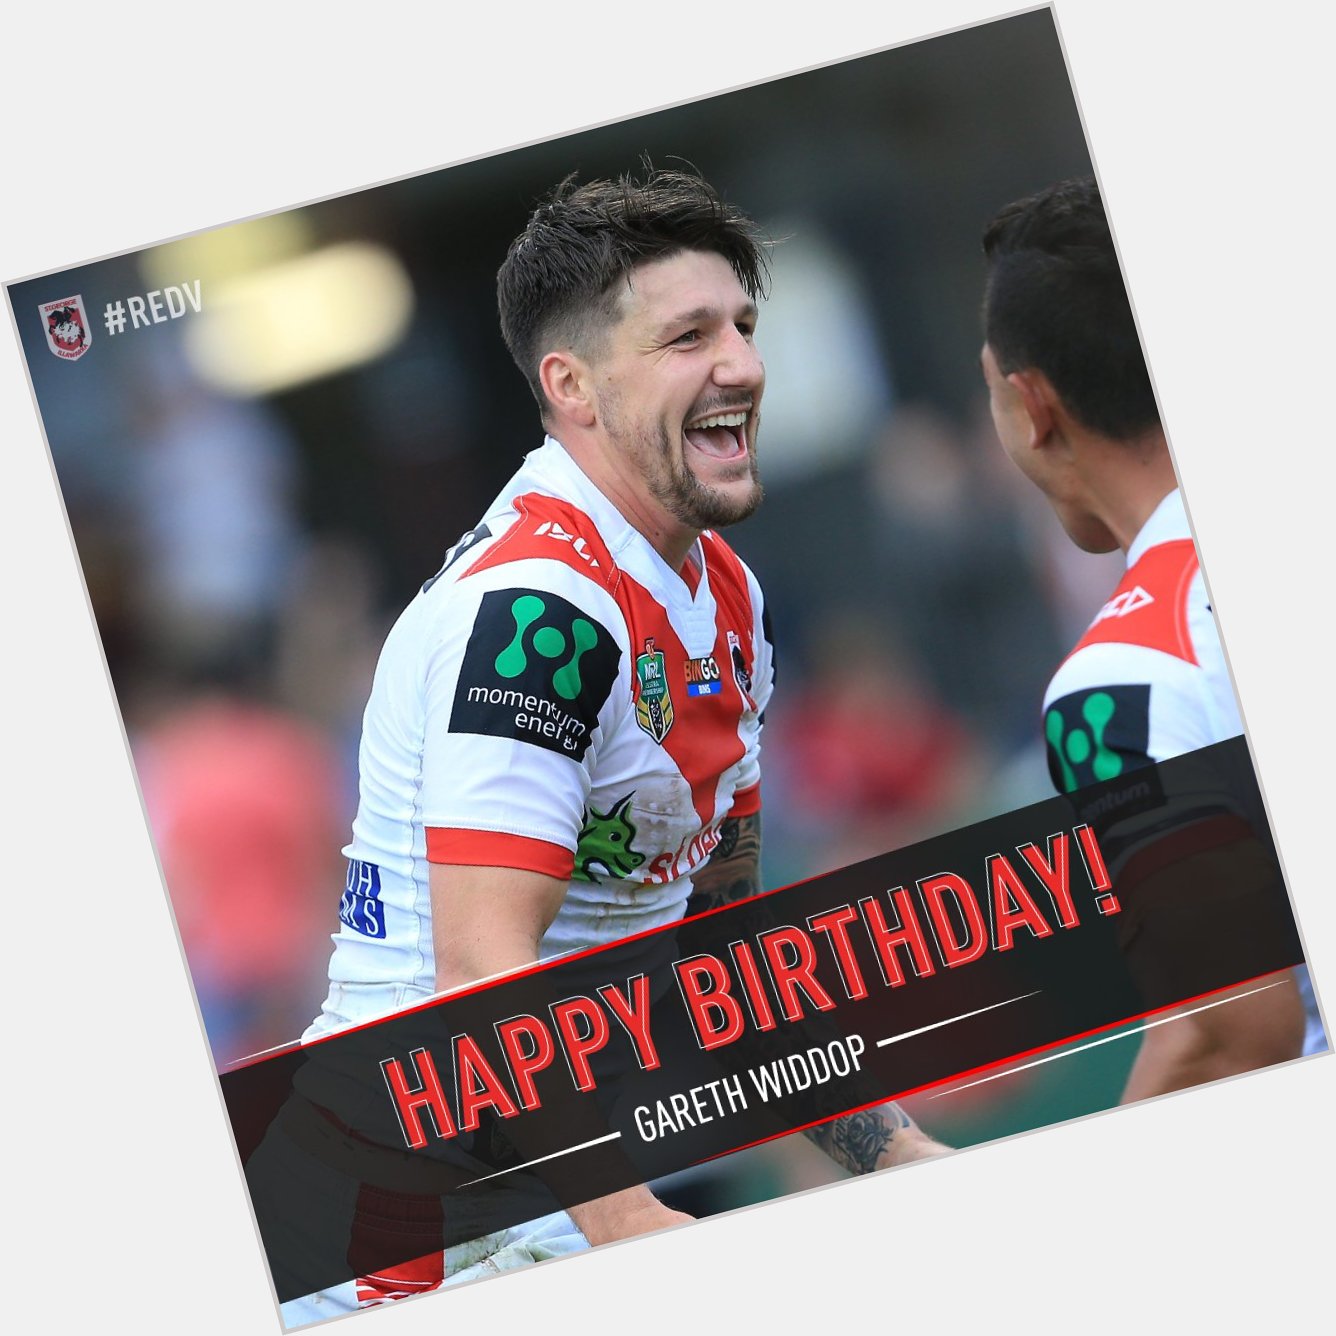 Join us in wishing a very Happy 28th Birthday to Gareth Widdop for today! 